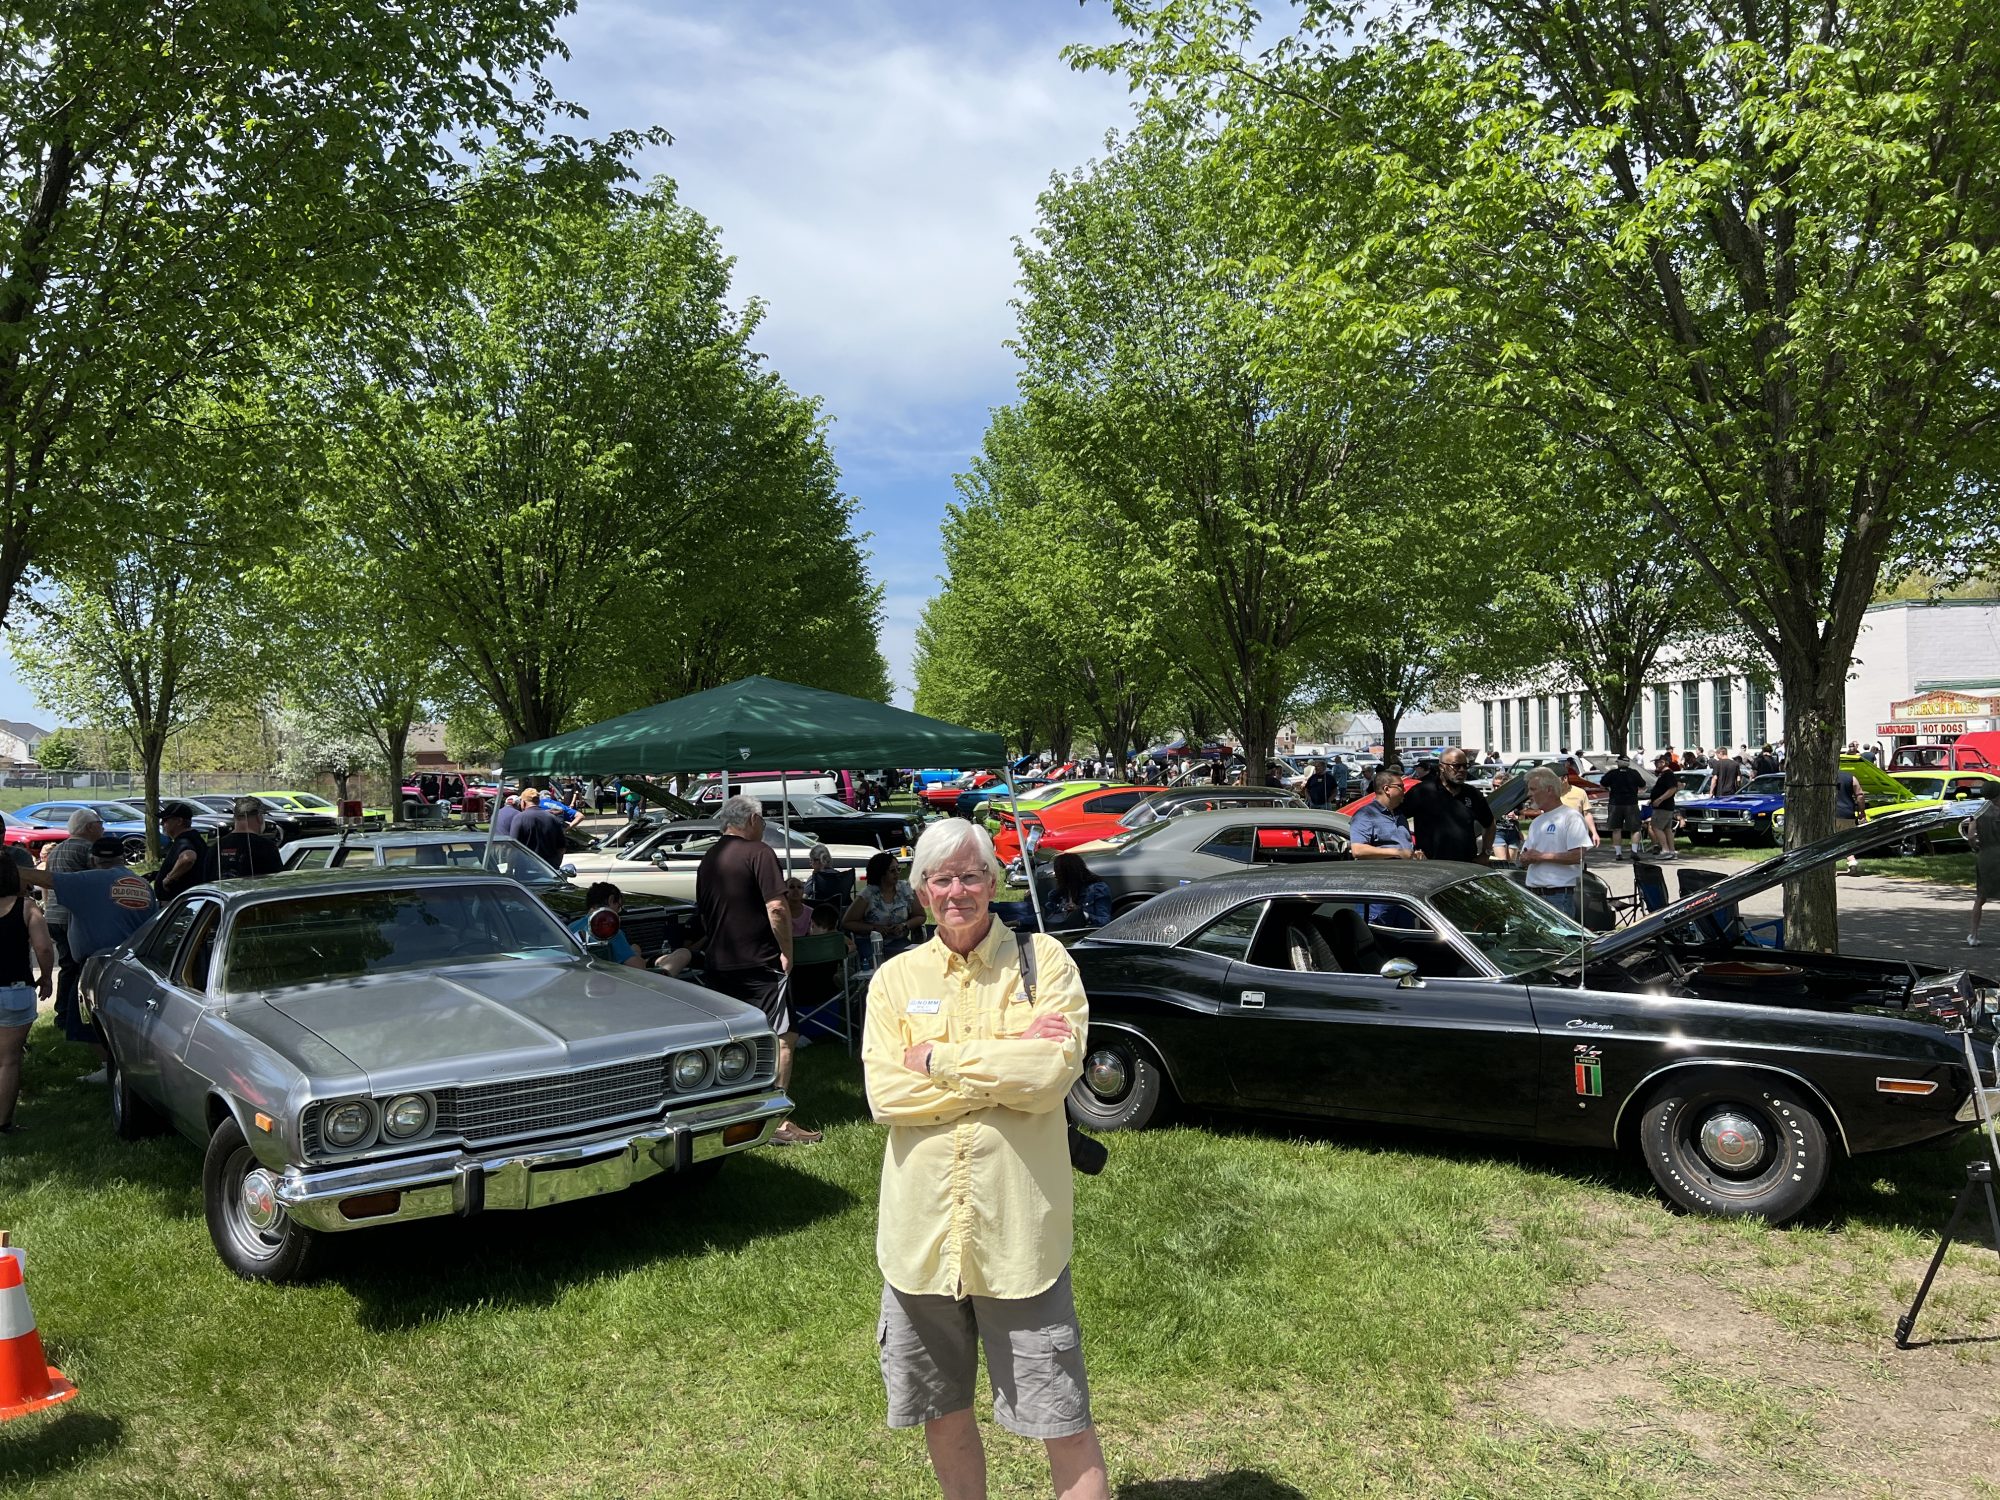 Vintage cars at a car show